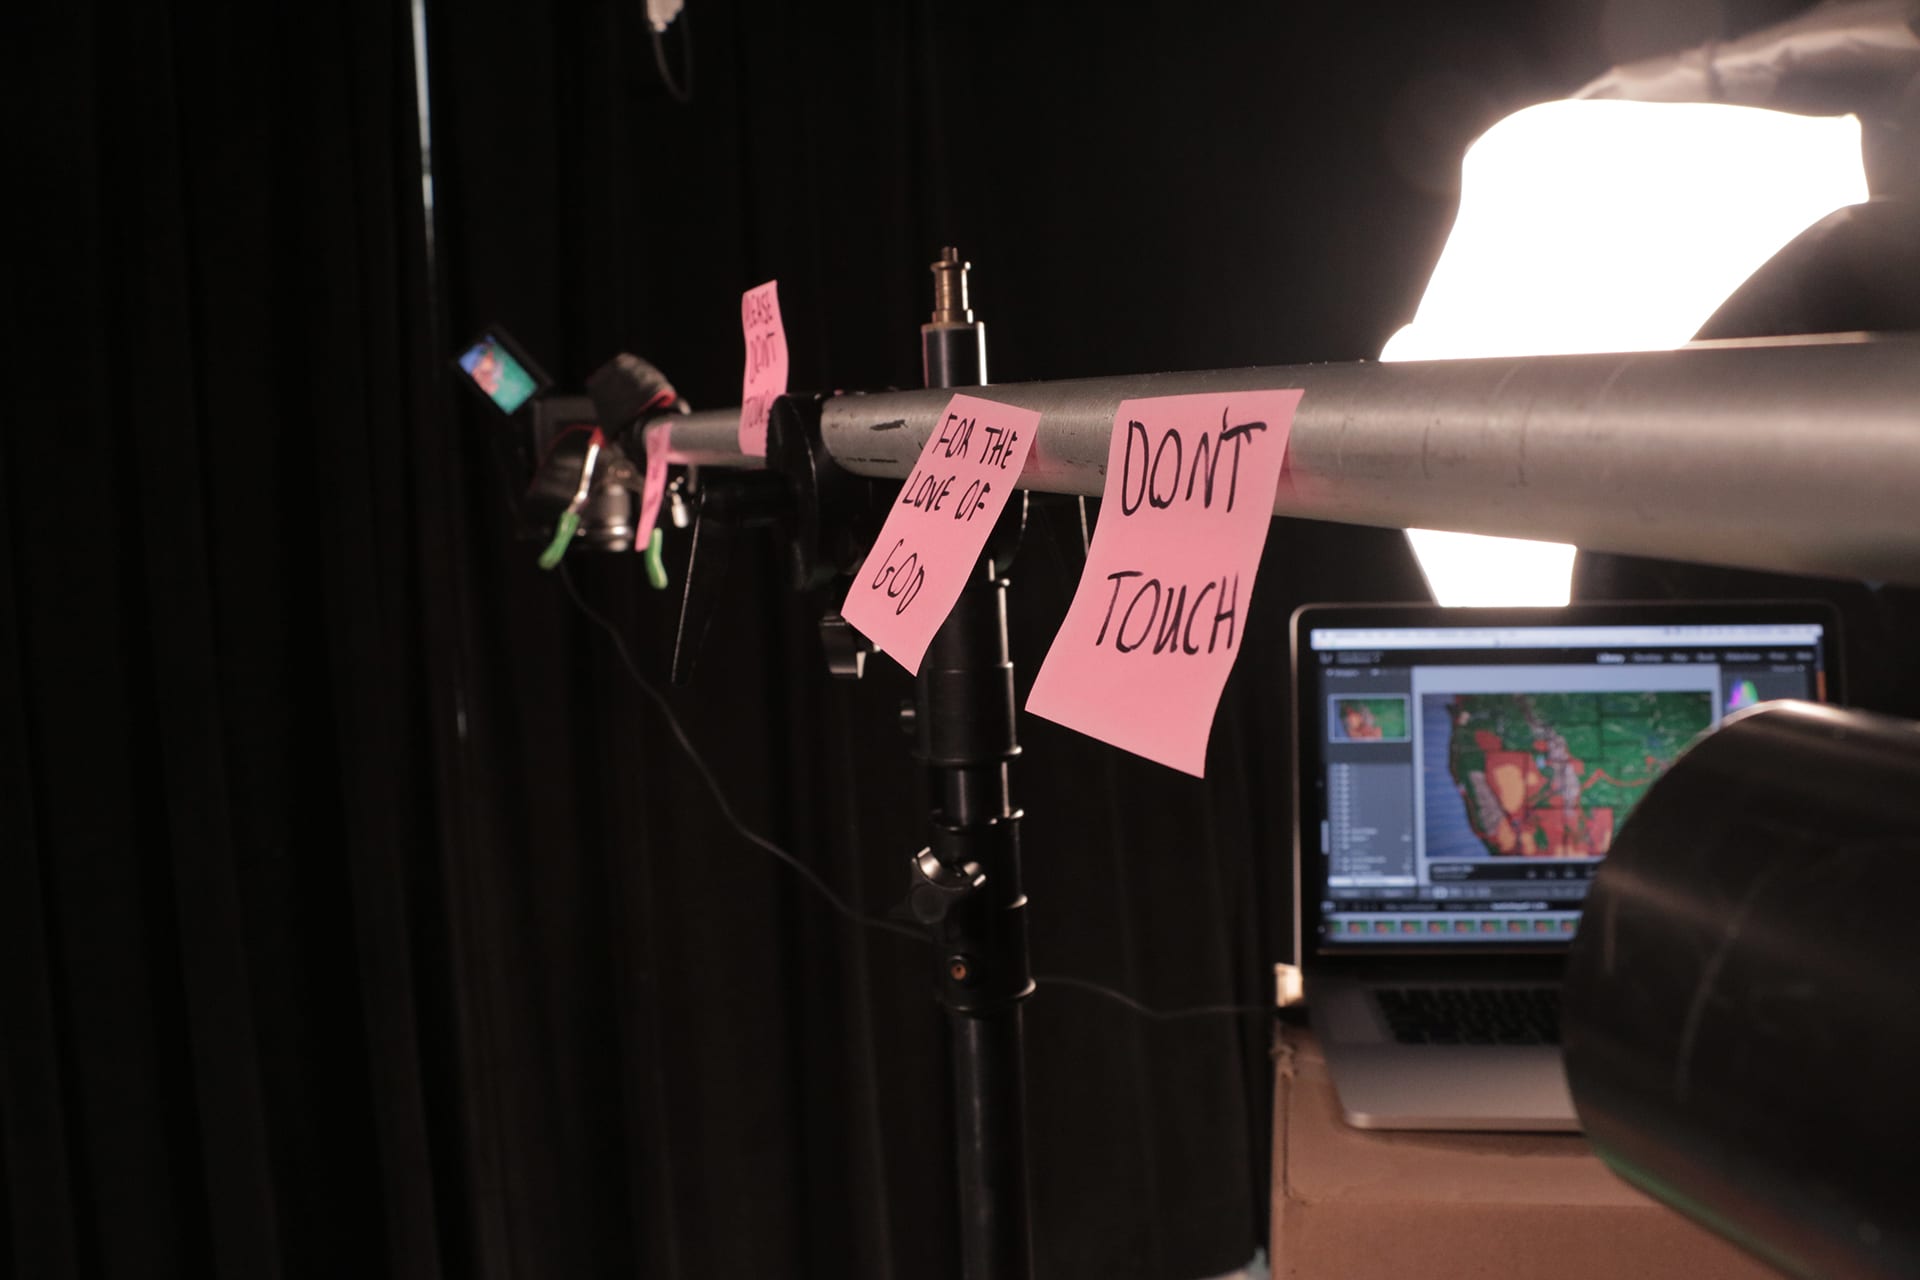 Sticky-notes on the camera arm pleading to not be touched.